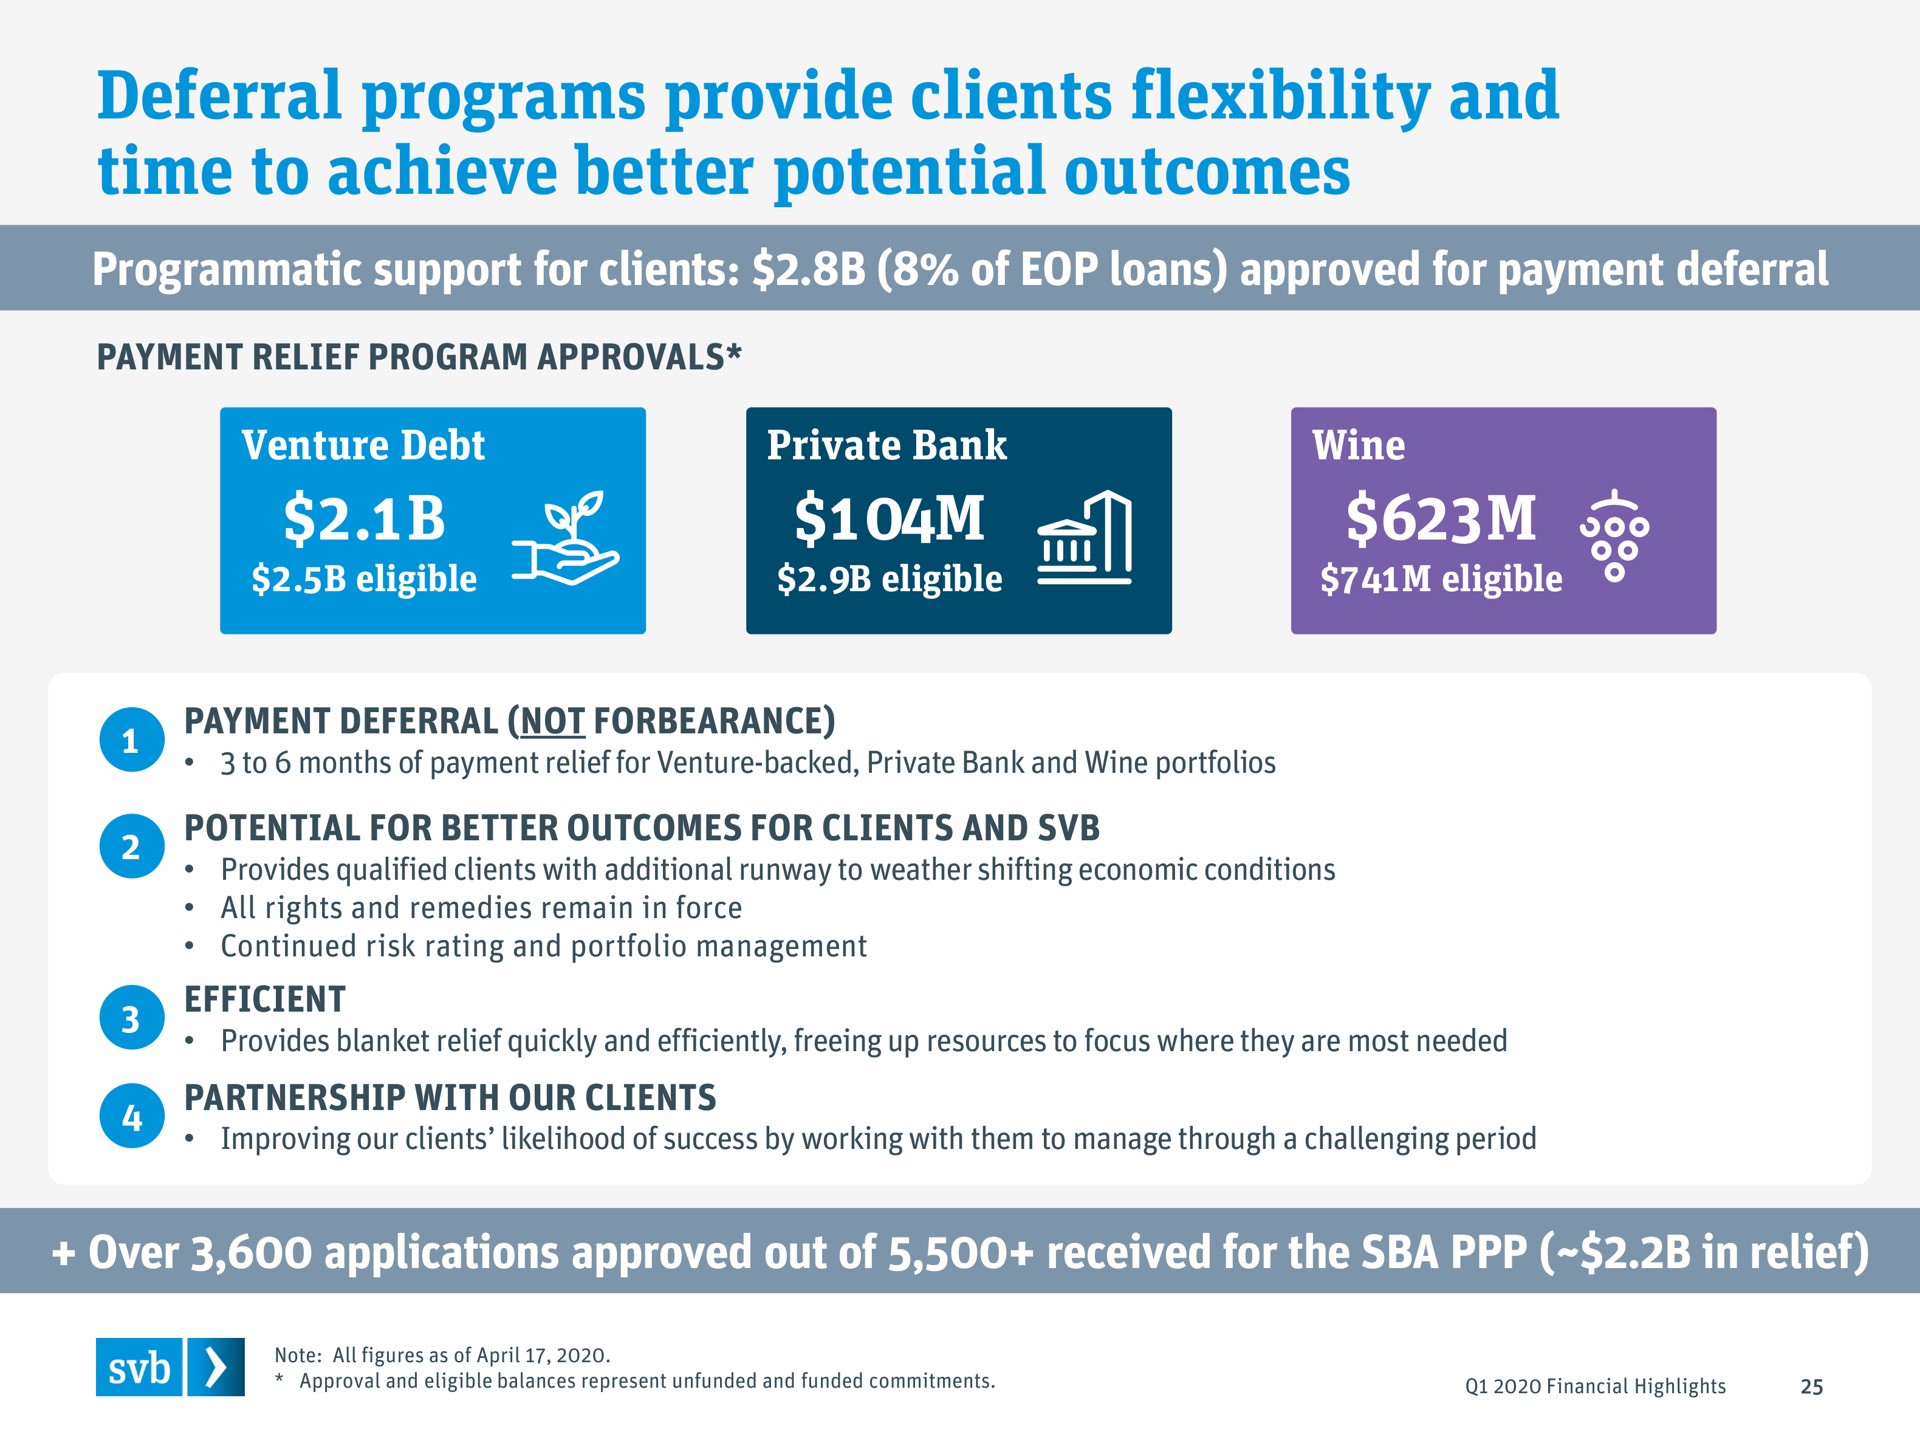 deferral programs provide clients flexibility and time to achieve better potential outcomes | Silicon Valley Bank